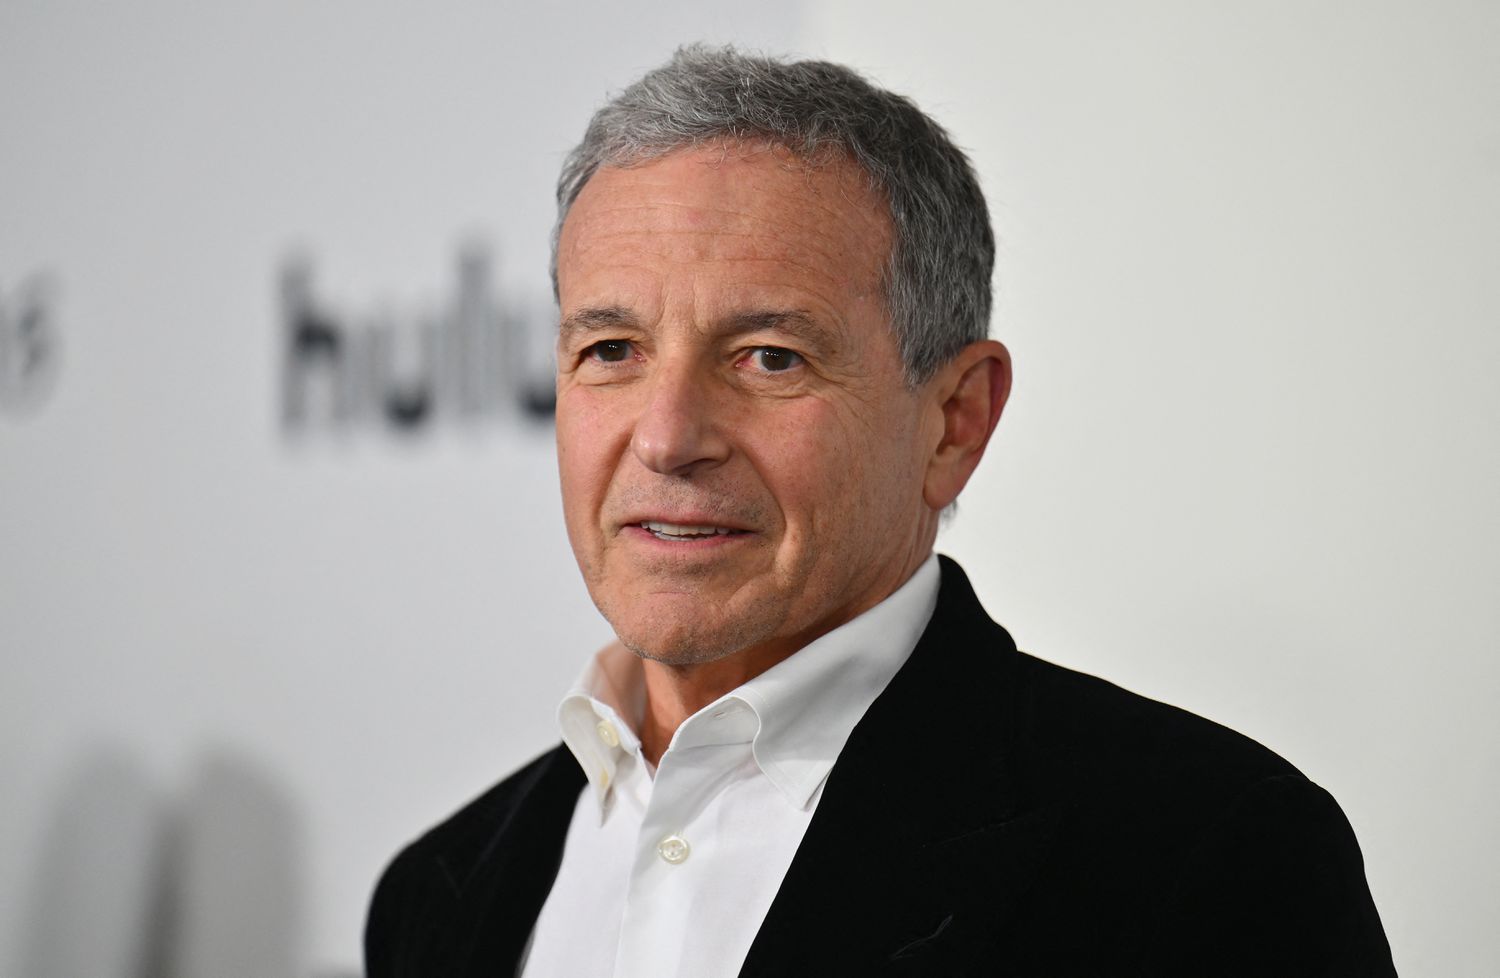 Disney CEO Bob Iger Says ‘We Invested Too Much’ in Streaming [Video]